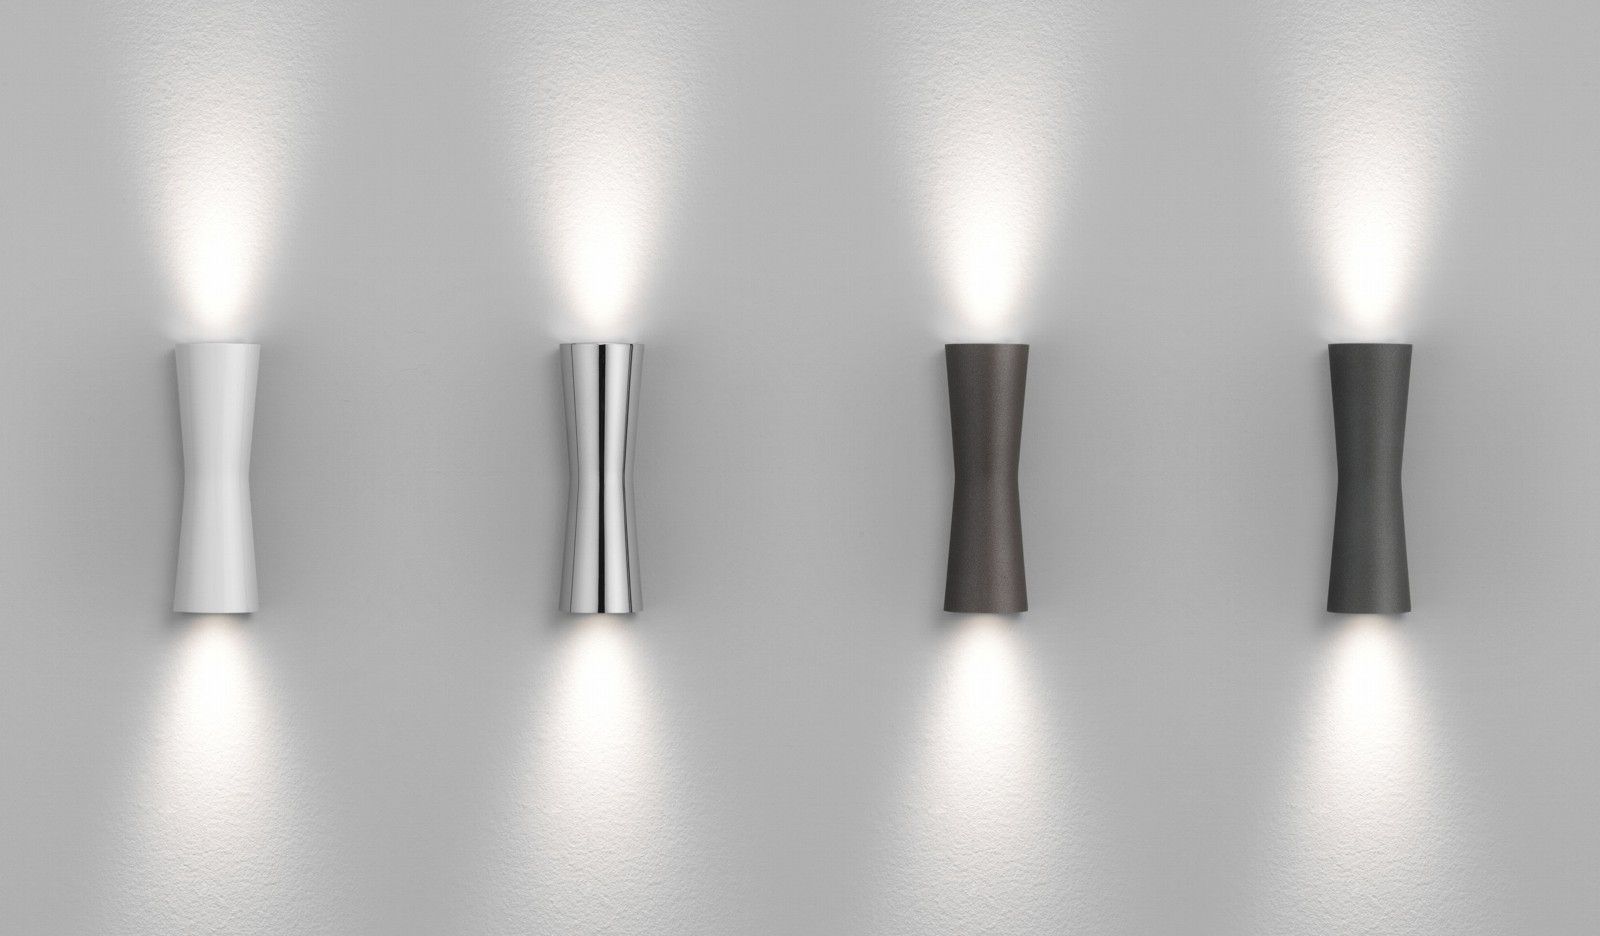 Exquisite Modern Exterior Wall Lights Design Is Like Home Office Set Intended For Outside Wall Down Lights (View 9 of 15)